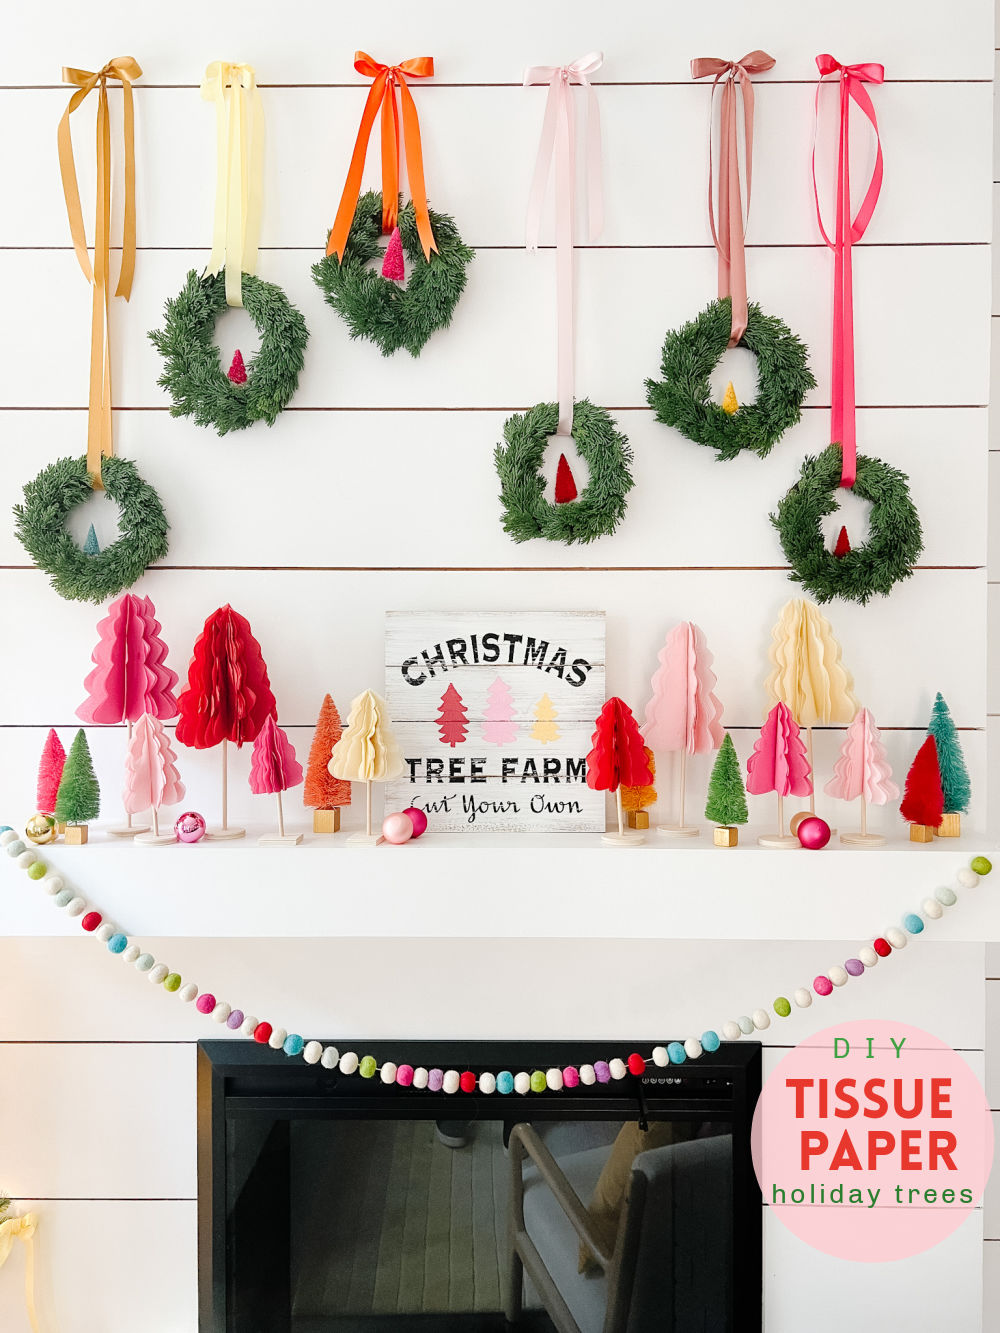 DIY Tissue Paper Holiday Trees. Add some color to your mantel or shelf by making these easy tissue paper trees with free printable templates.